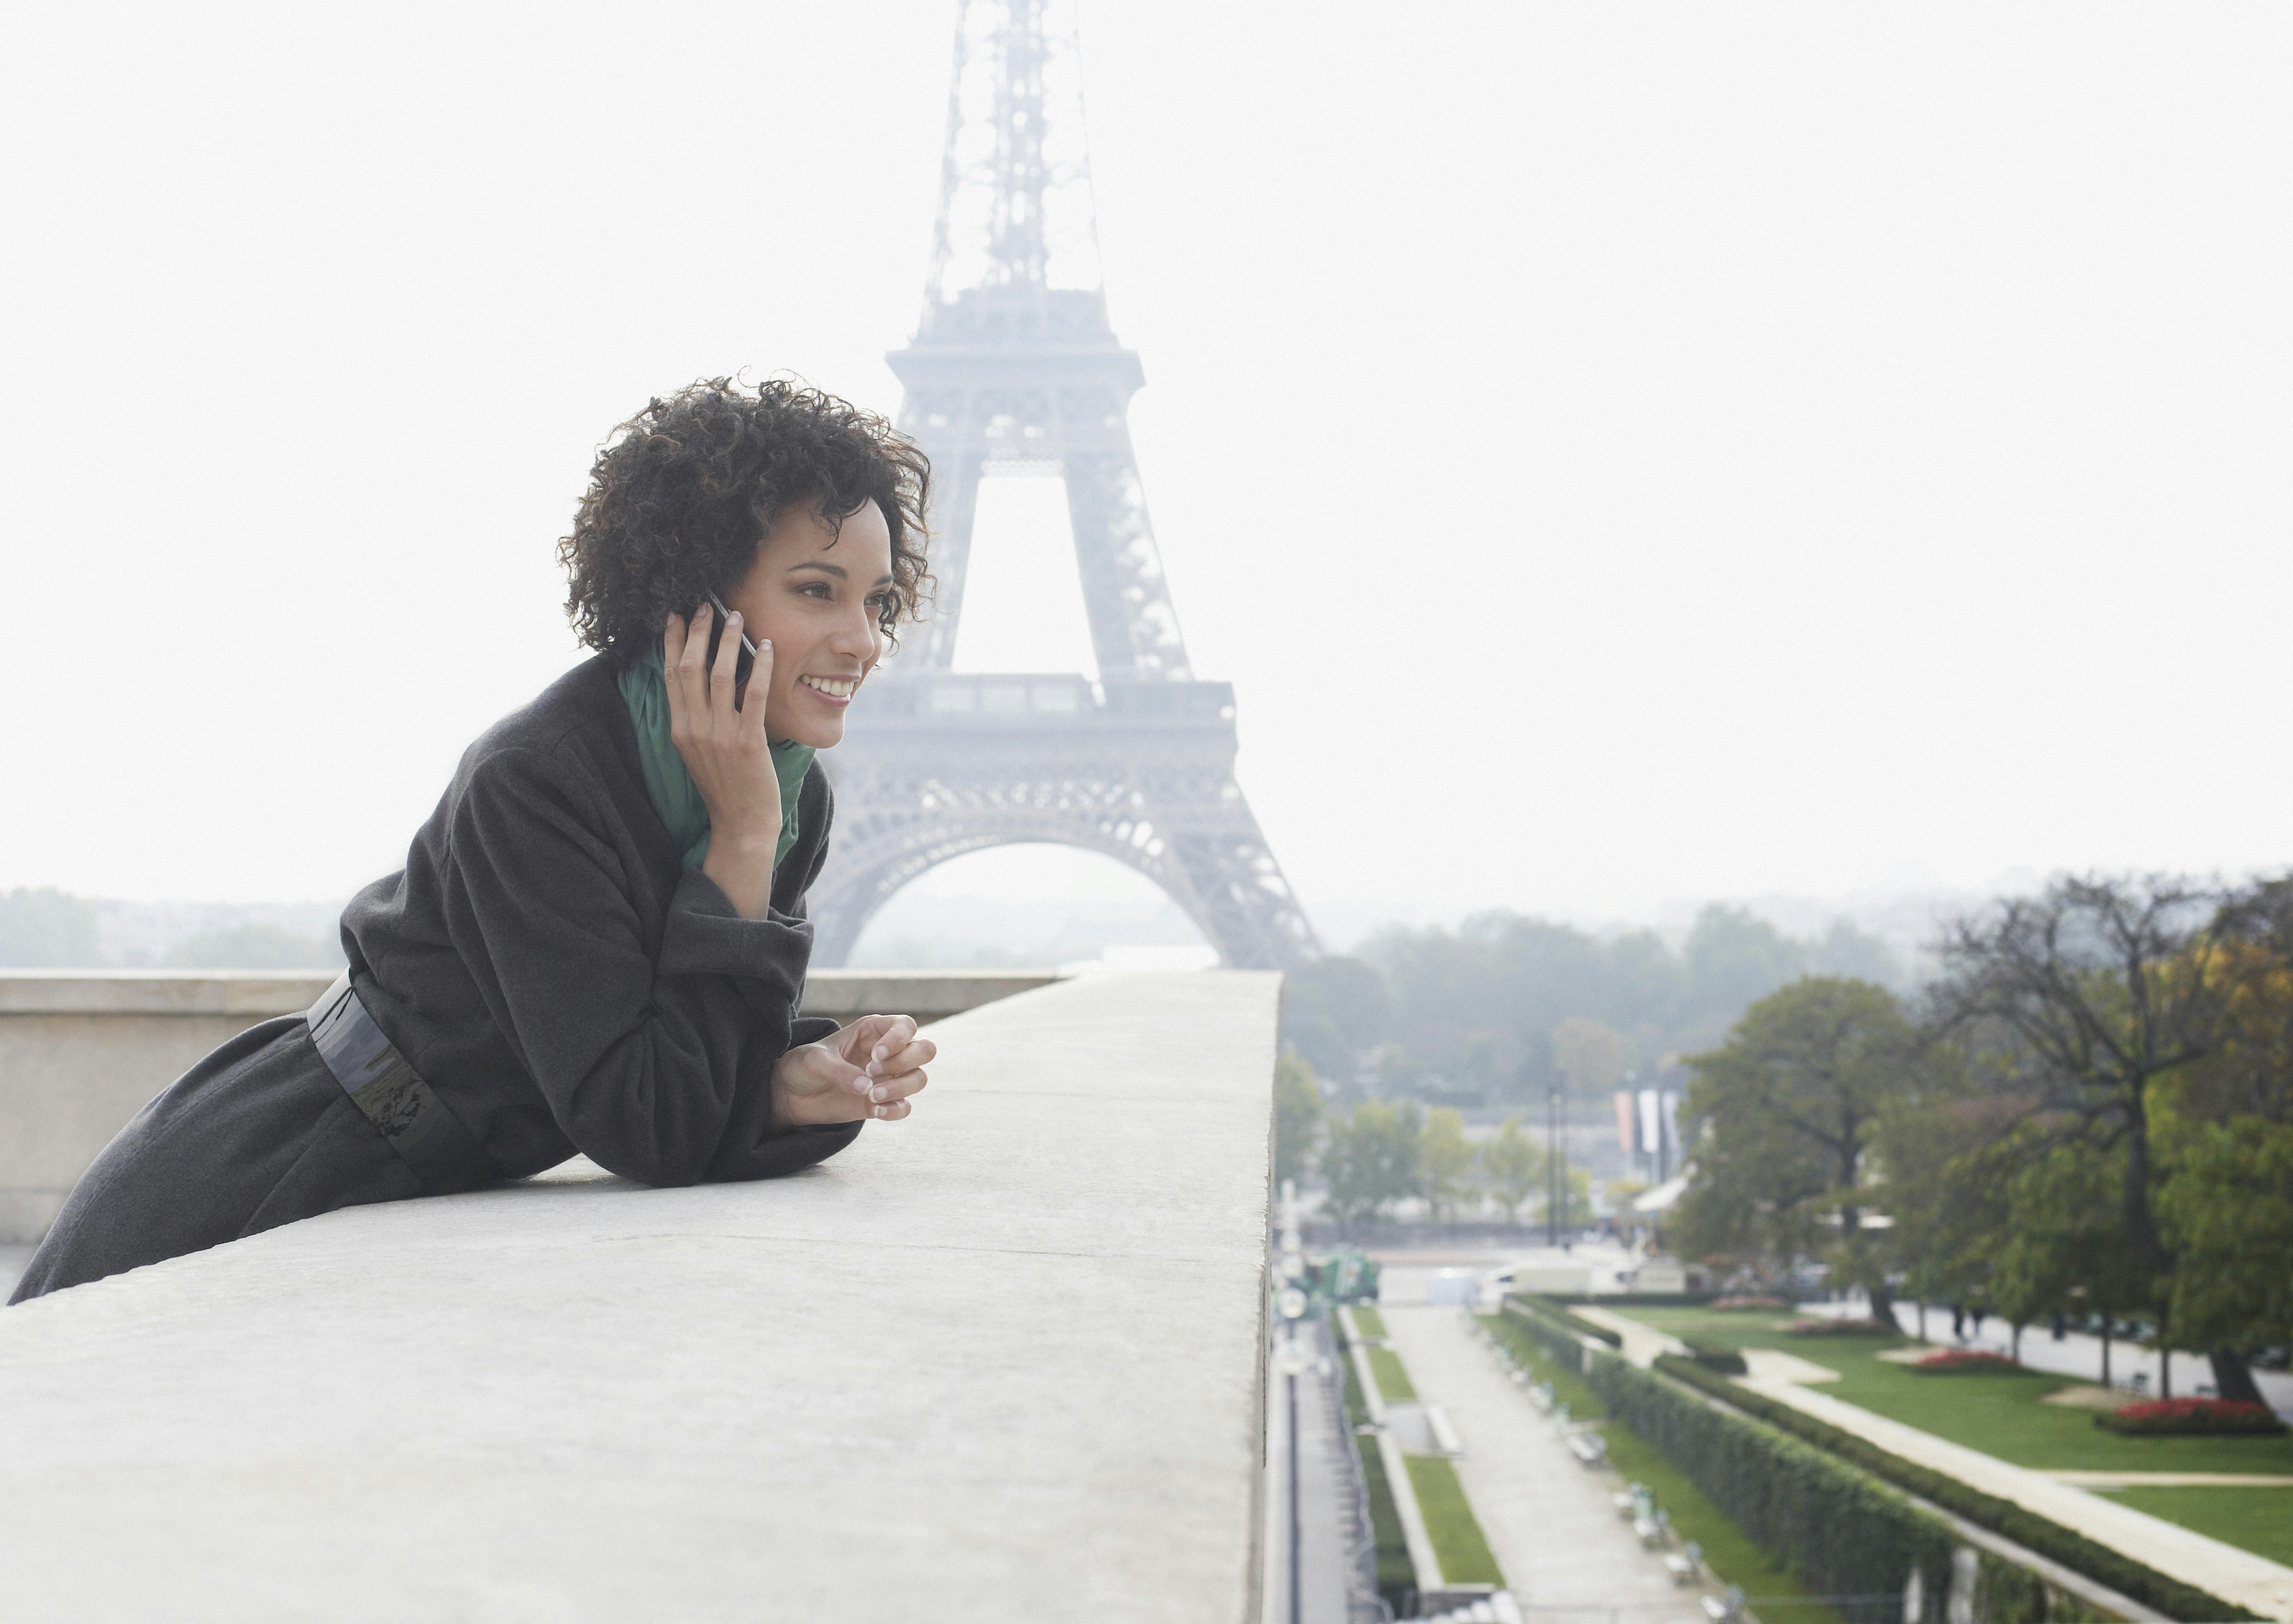 Woman outdoors on her mobile phone by the Eiffel Tower.